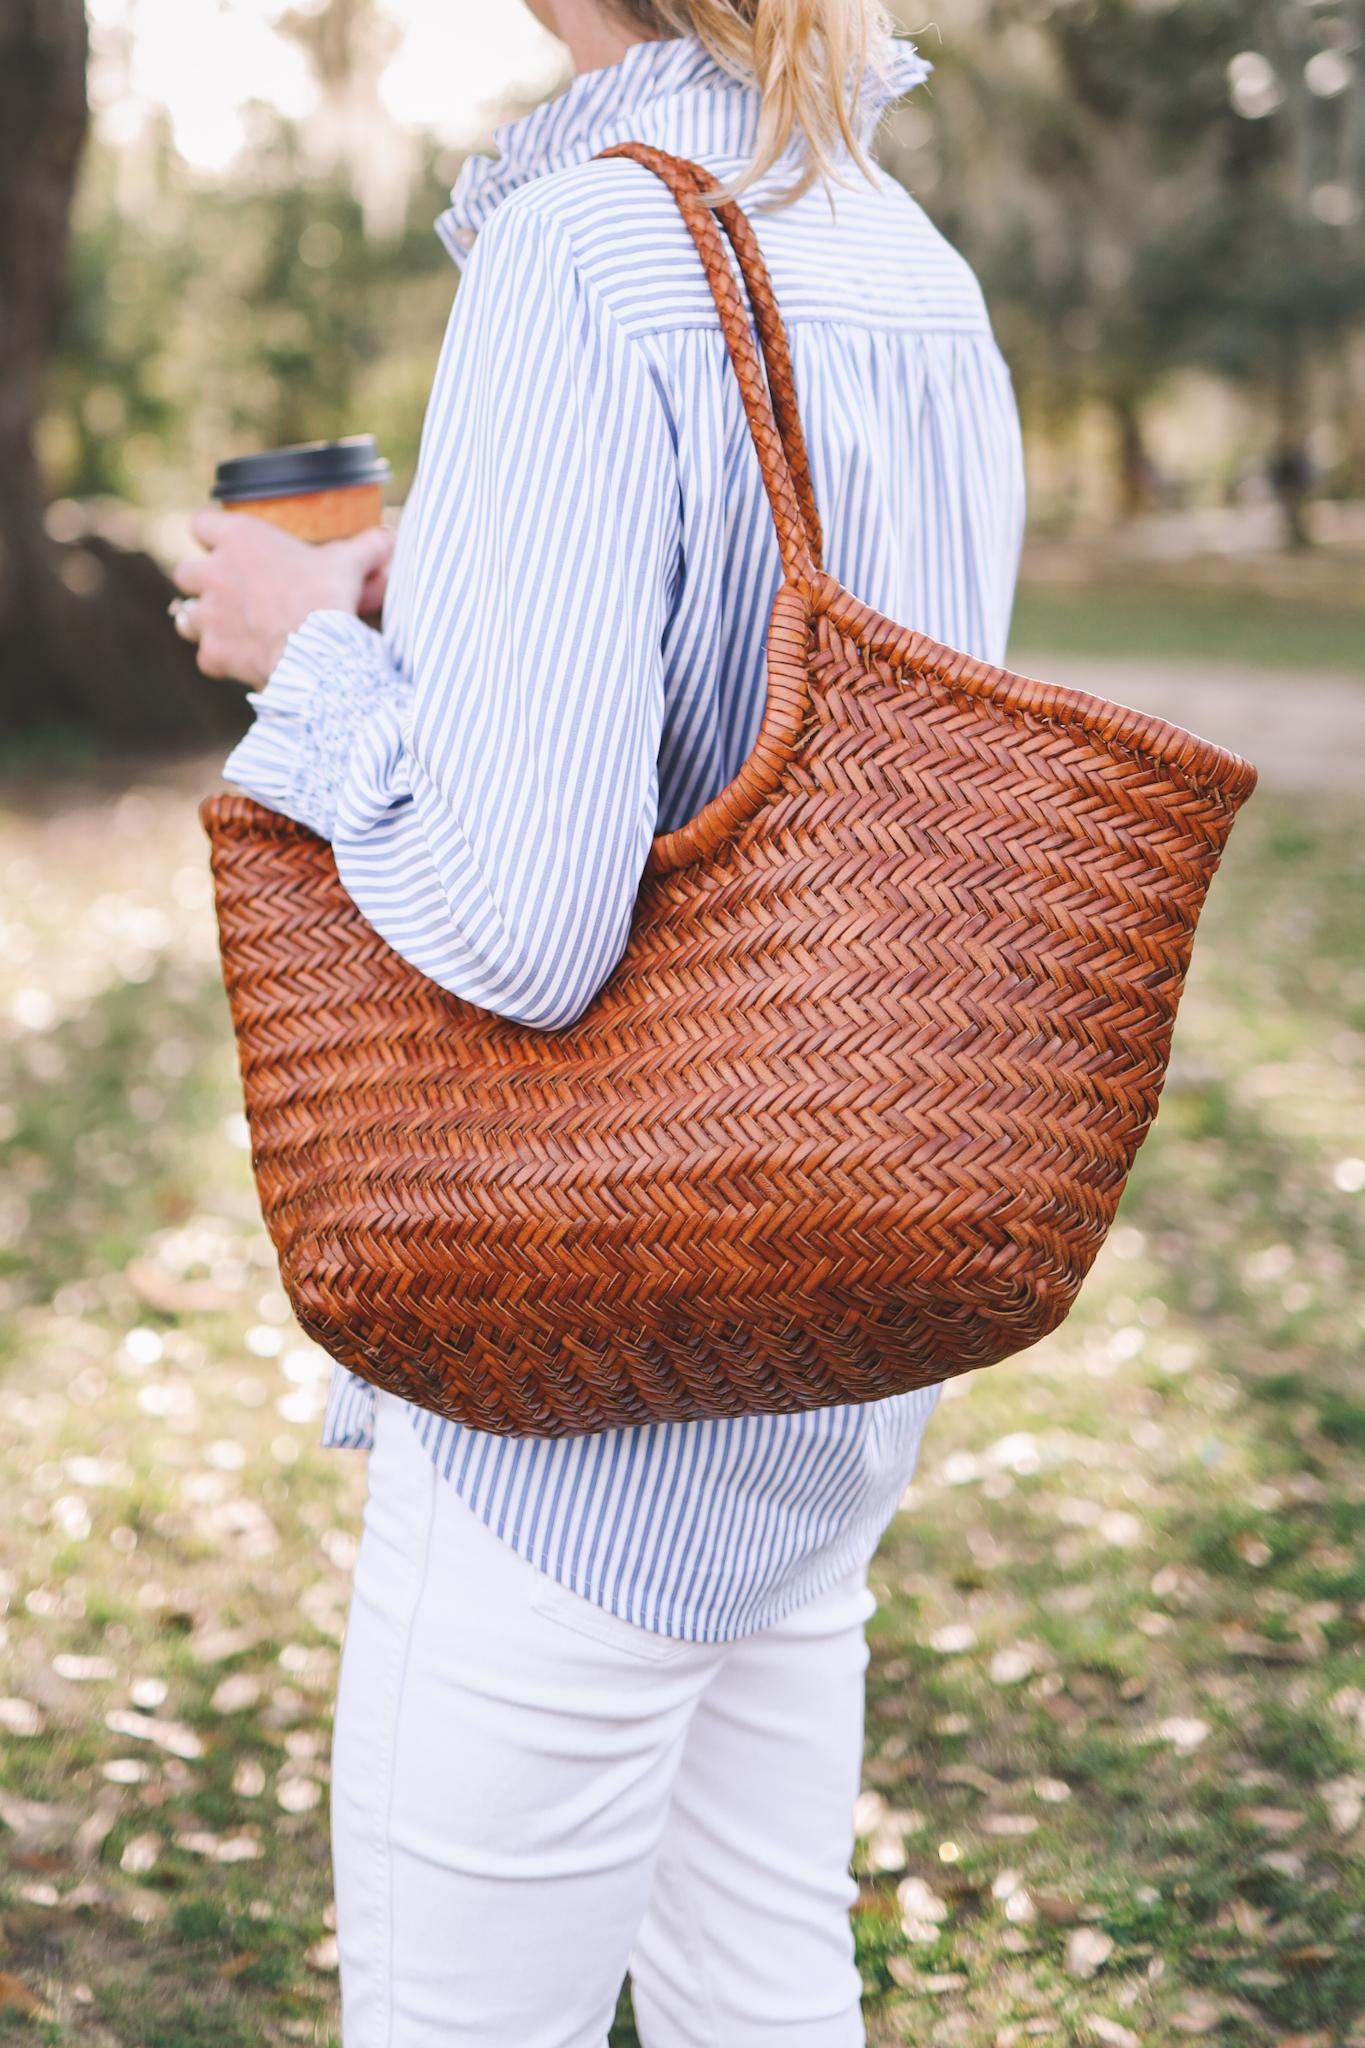 large woven tote